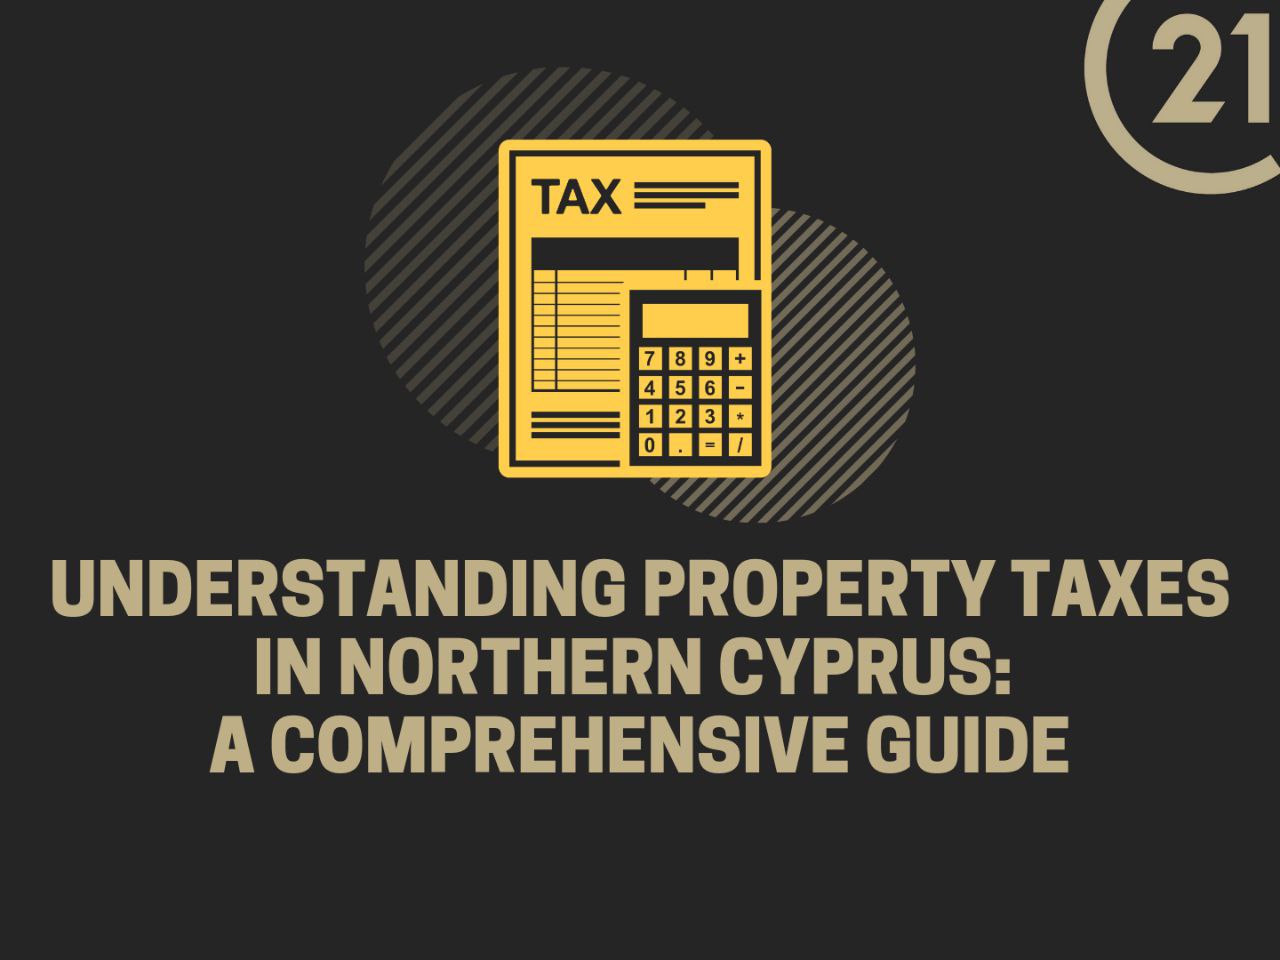 Understanding Property Taxes in Northern Cyprus: A Comprehensive Guide